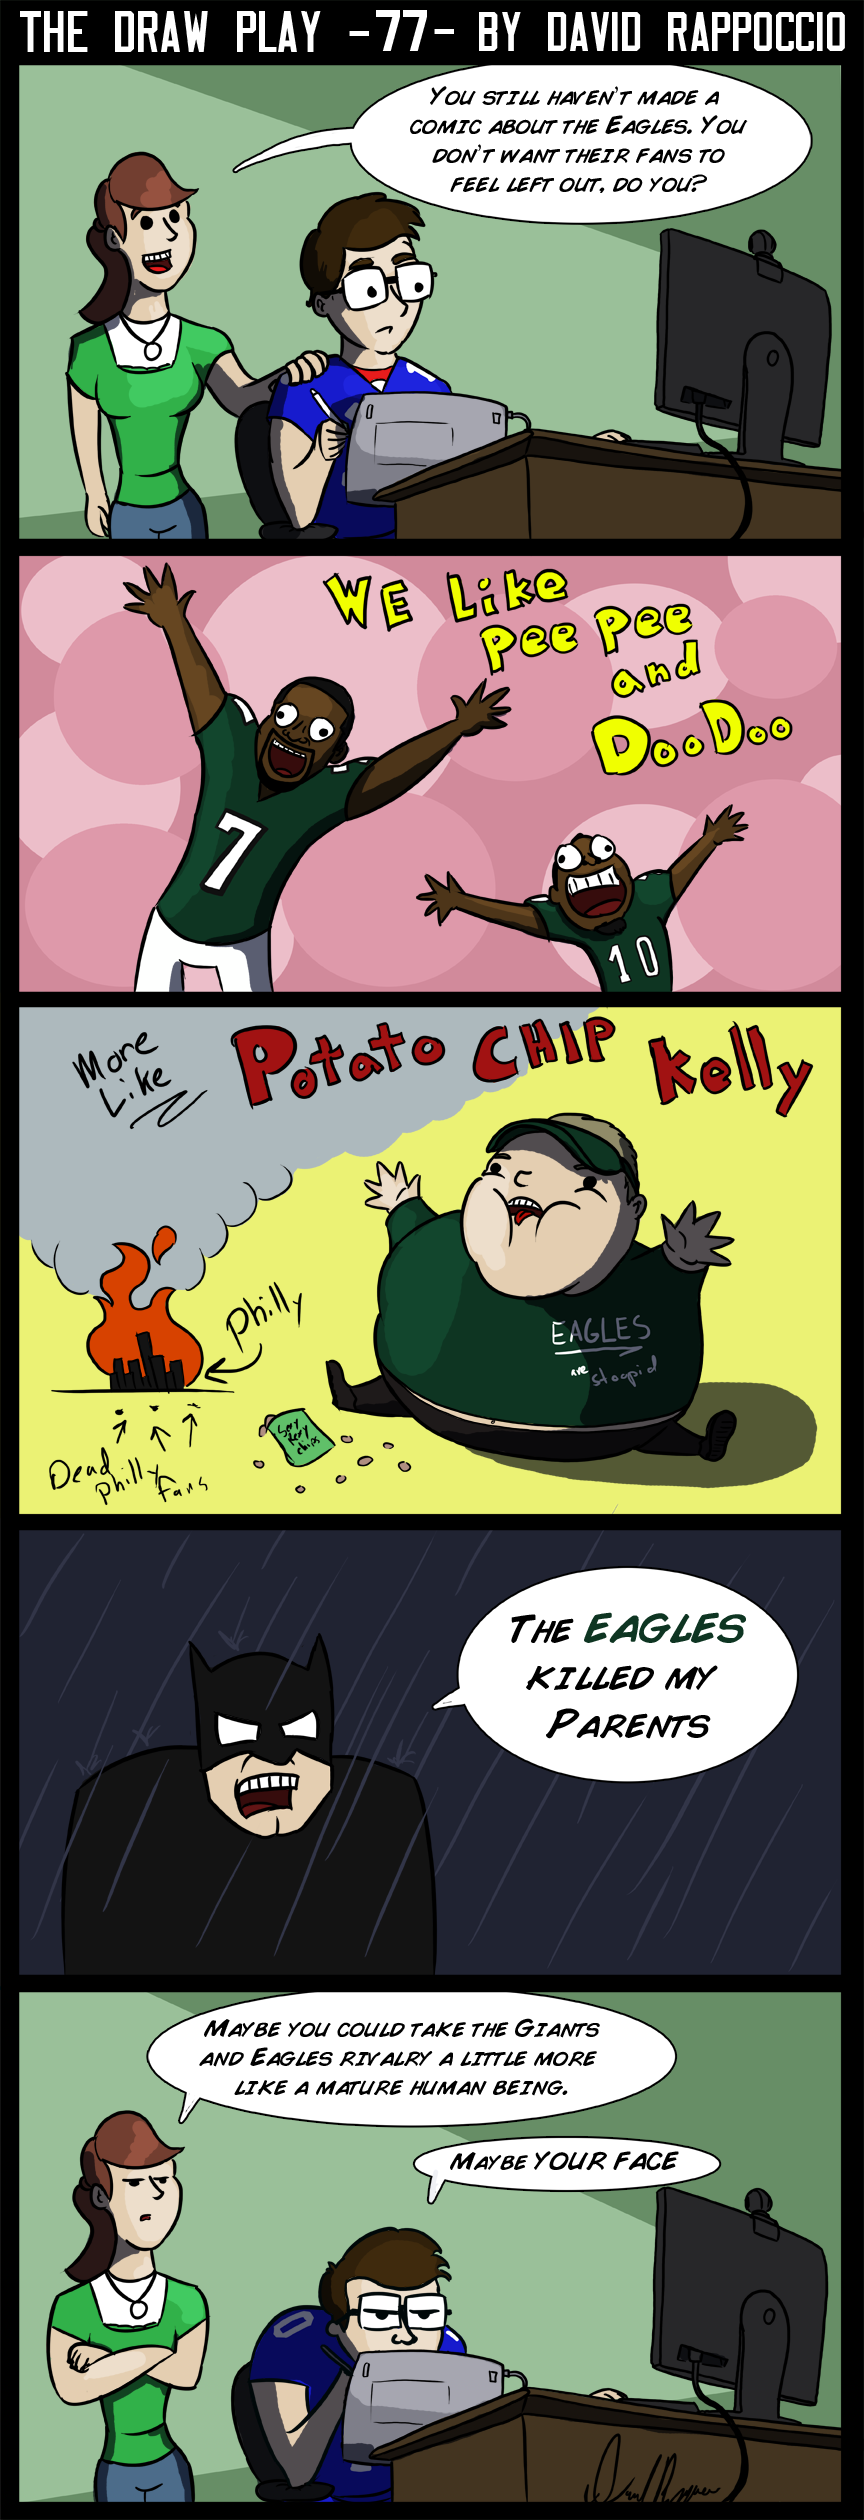 comic-2013-04-02-ComicabouttheEagles.png